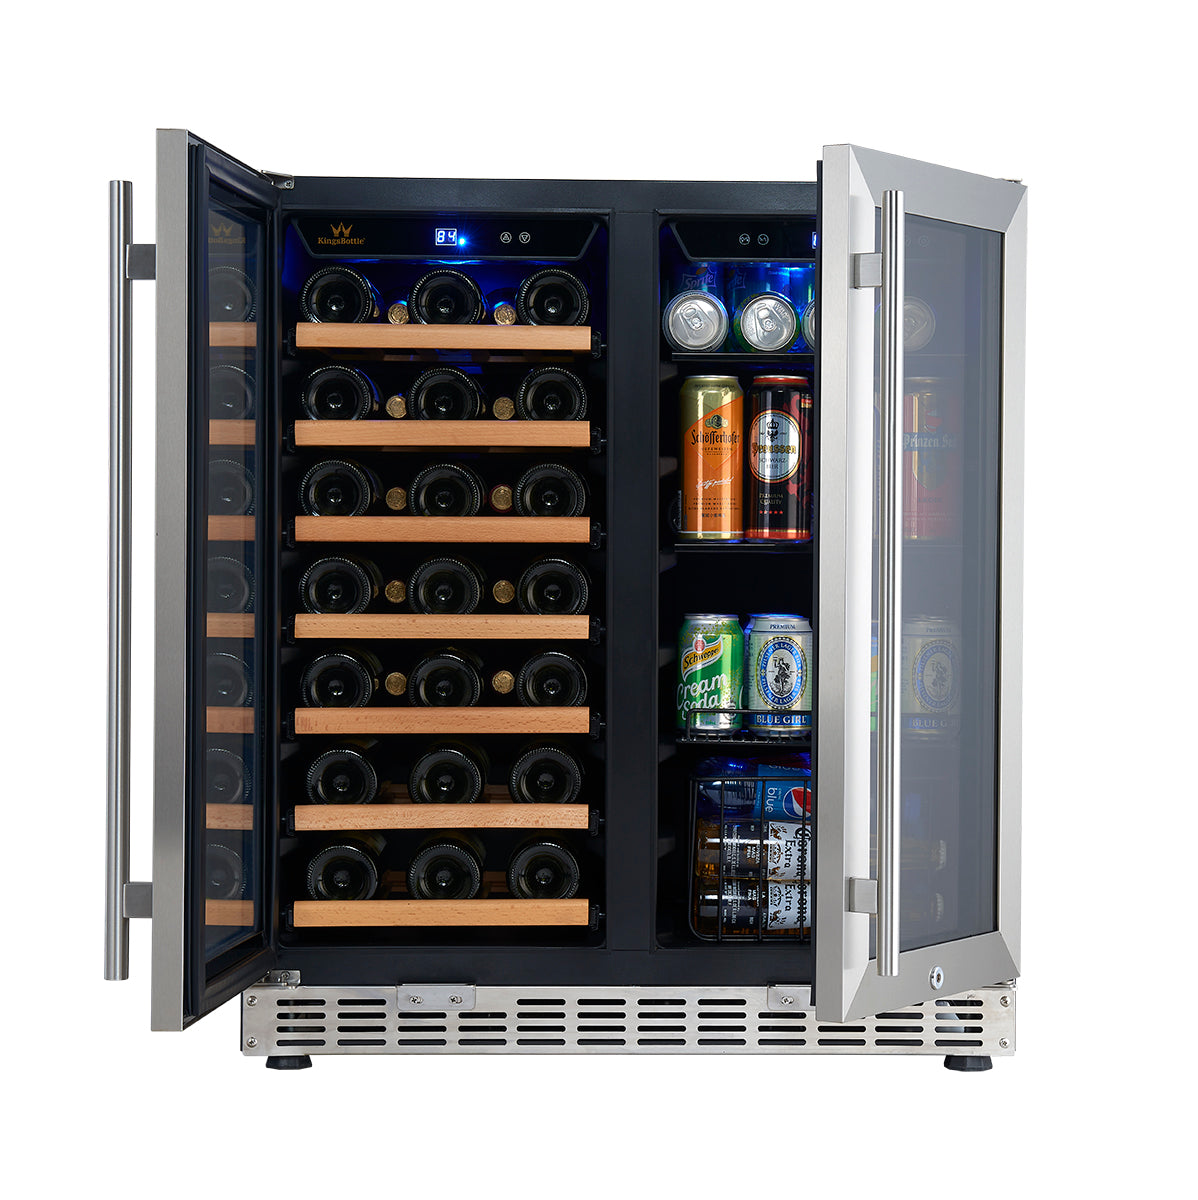 A Kings Bottle 30" Under Counter Low-E Glass Door Wine and Beer Cooler Combo with bottles and cans inside.